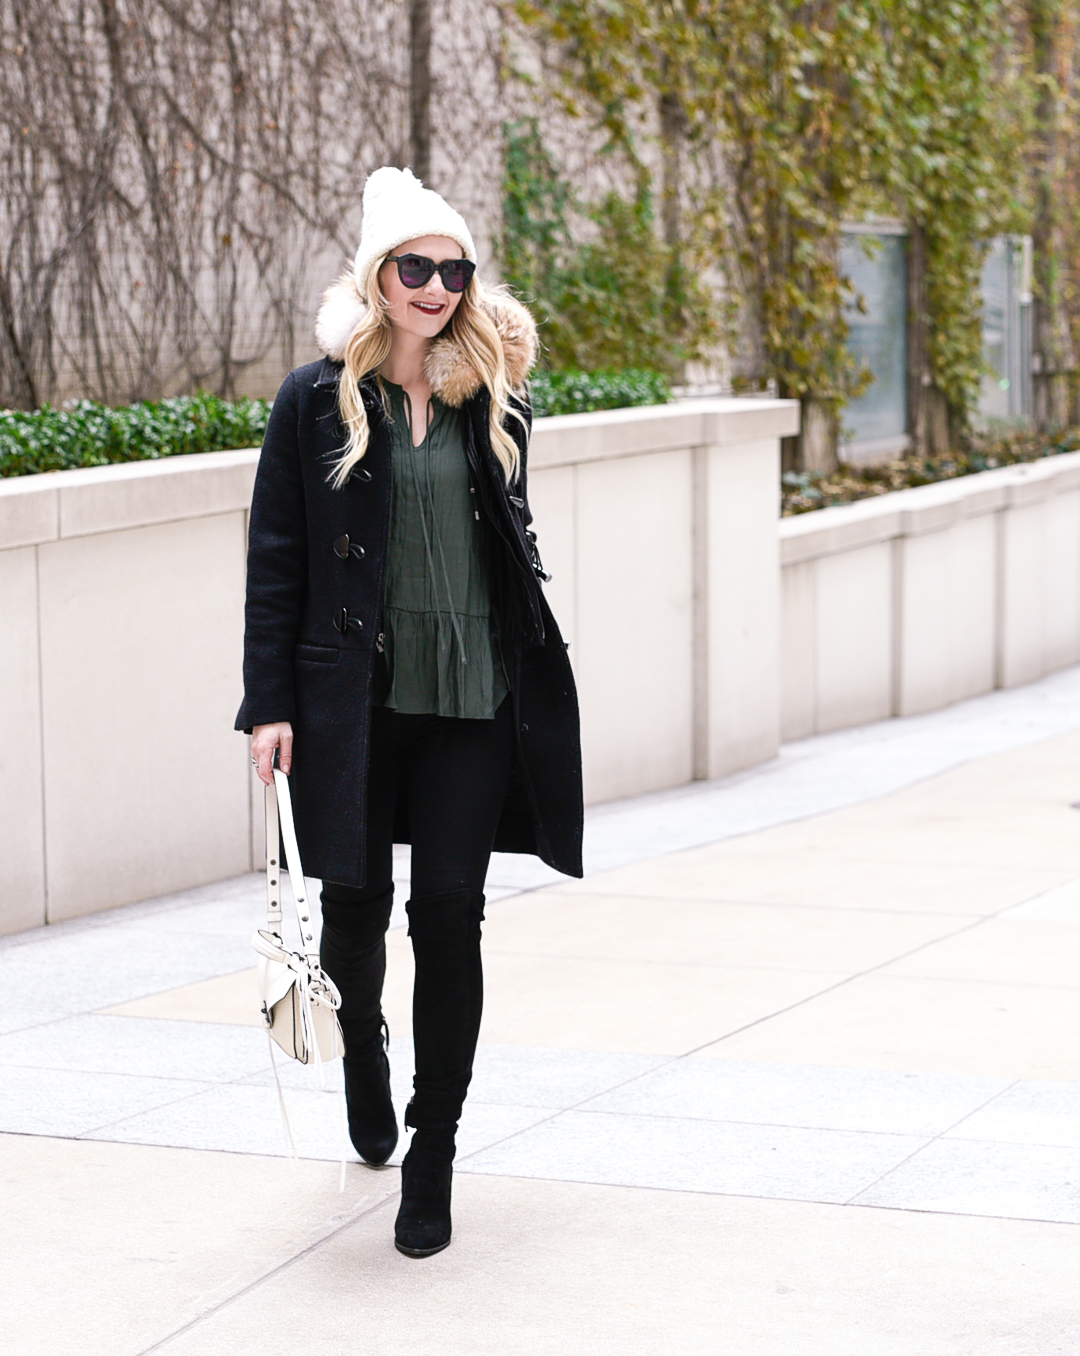 Layering a black J.Crew parka, black skinny jeans, and suede over the knee boots. 